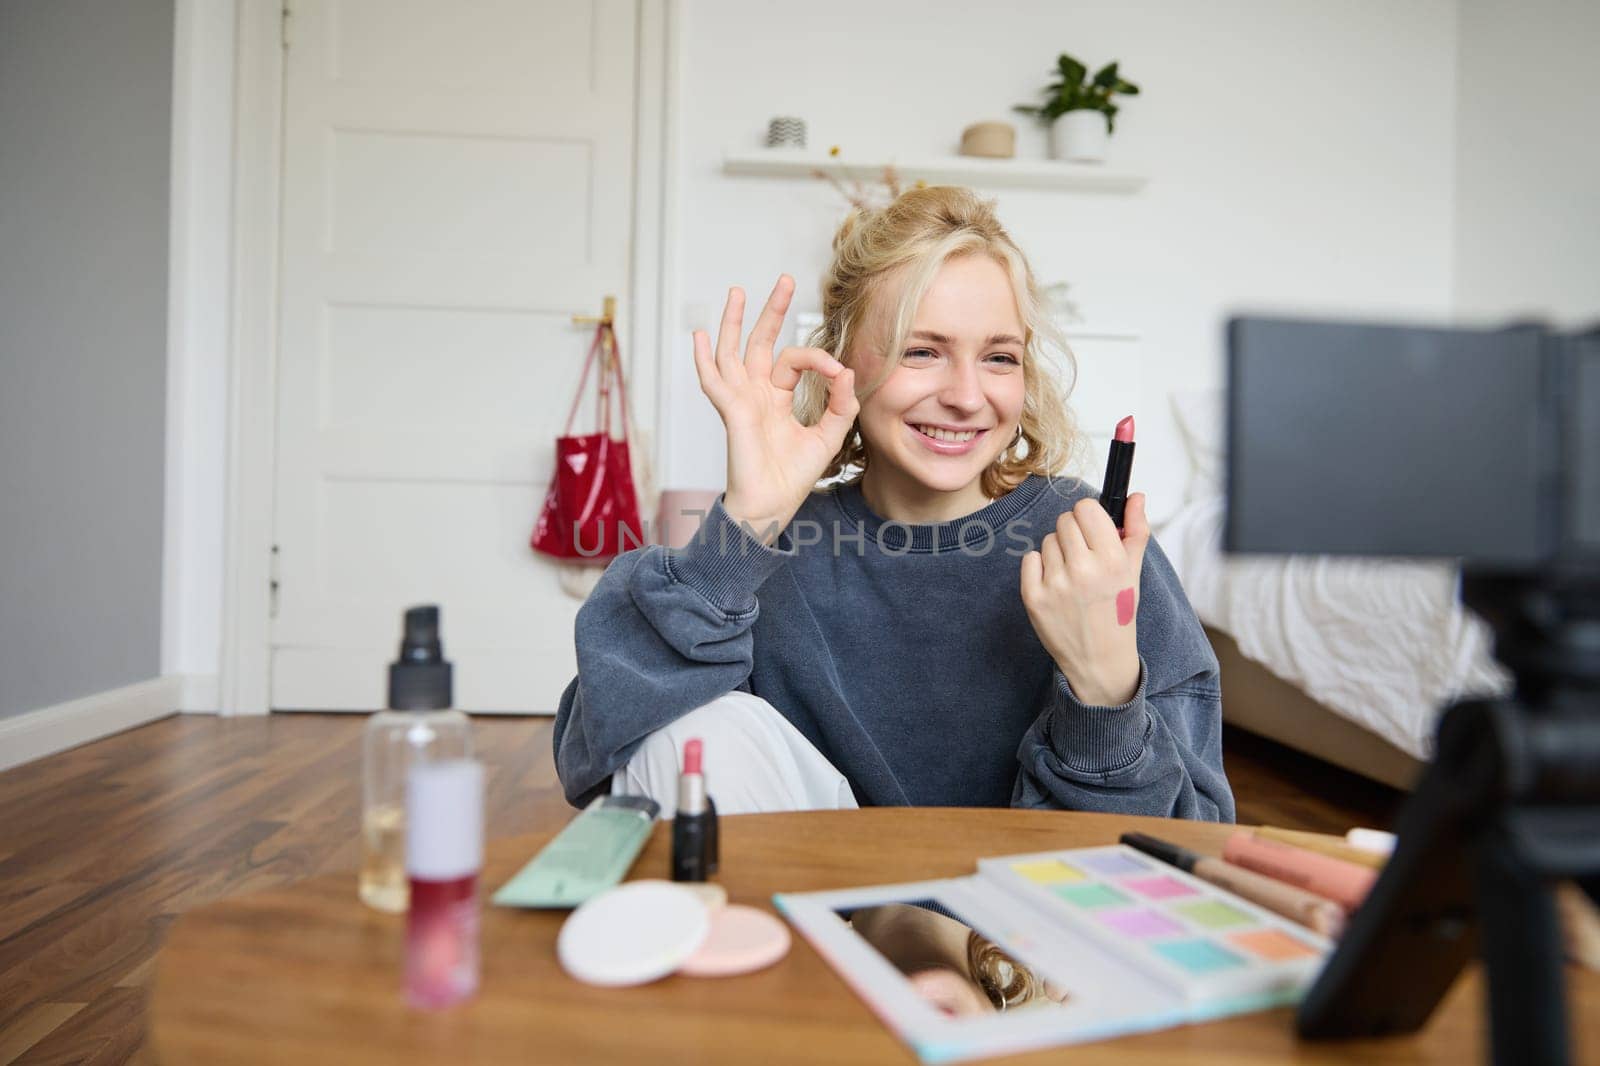 Cheerful, smiling young woman recording a vlog, showing okay, ok gesture and favorite lipstick, recommending beauty product for social media followers, using digital camera to create content.